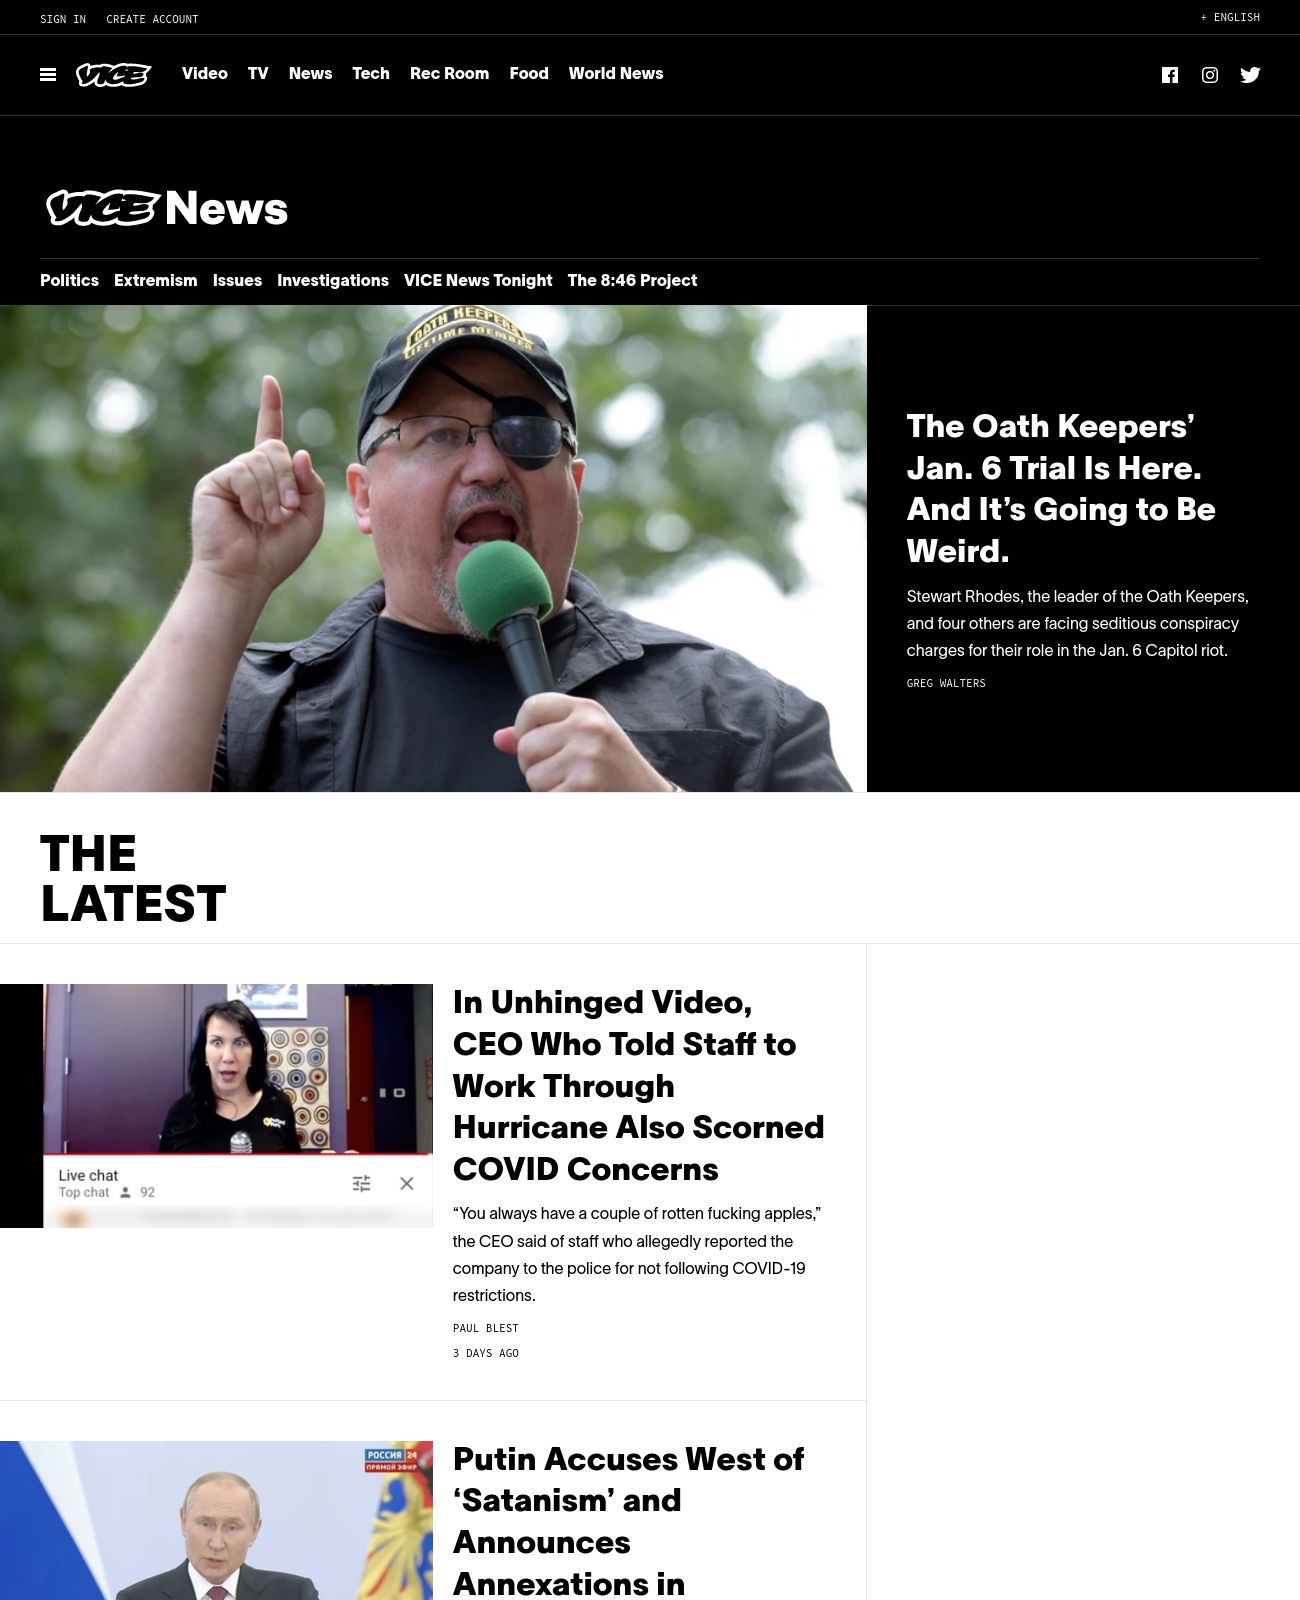 Vice News at 2022-10-03 01:04:52-04:00 local time